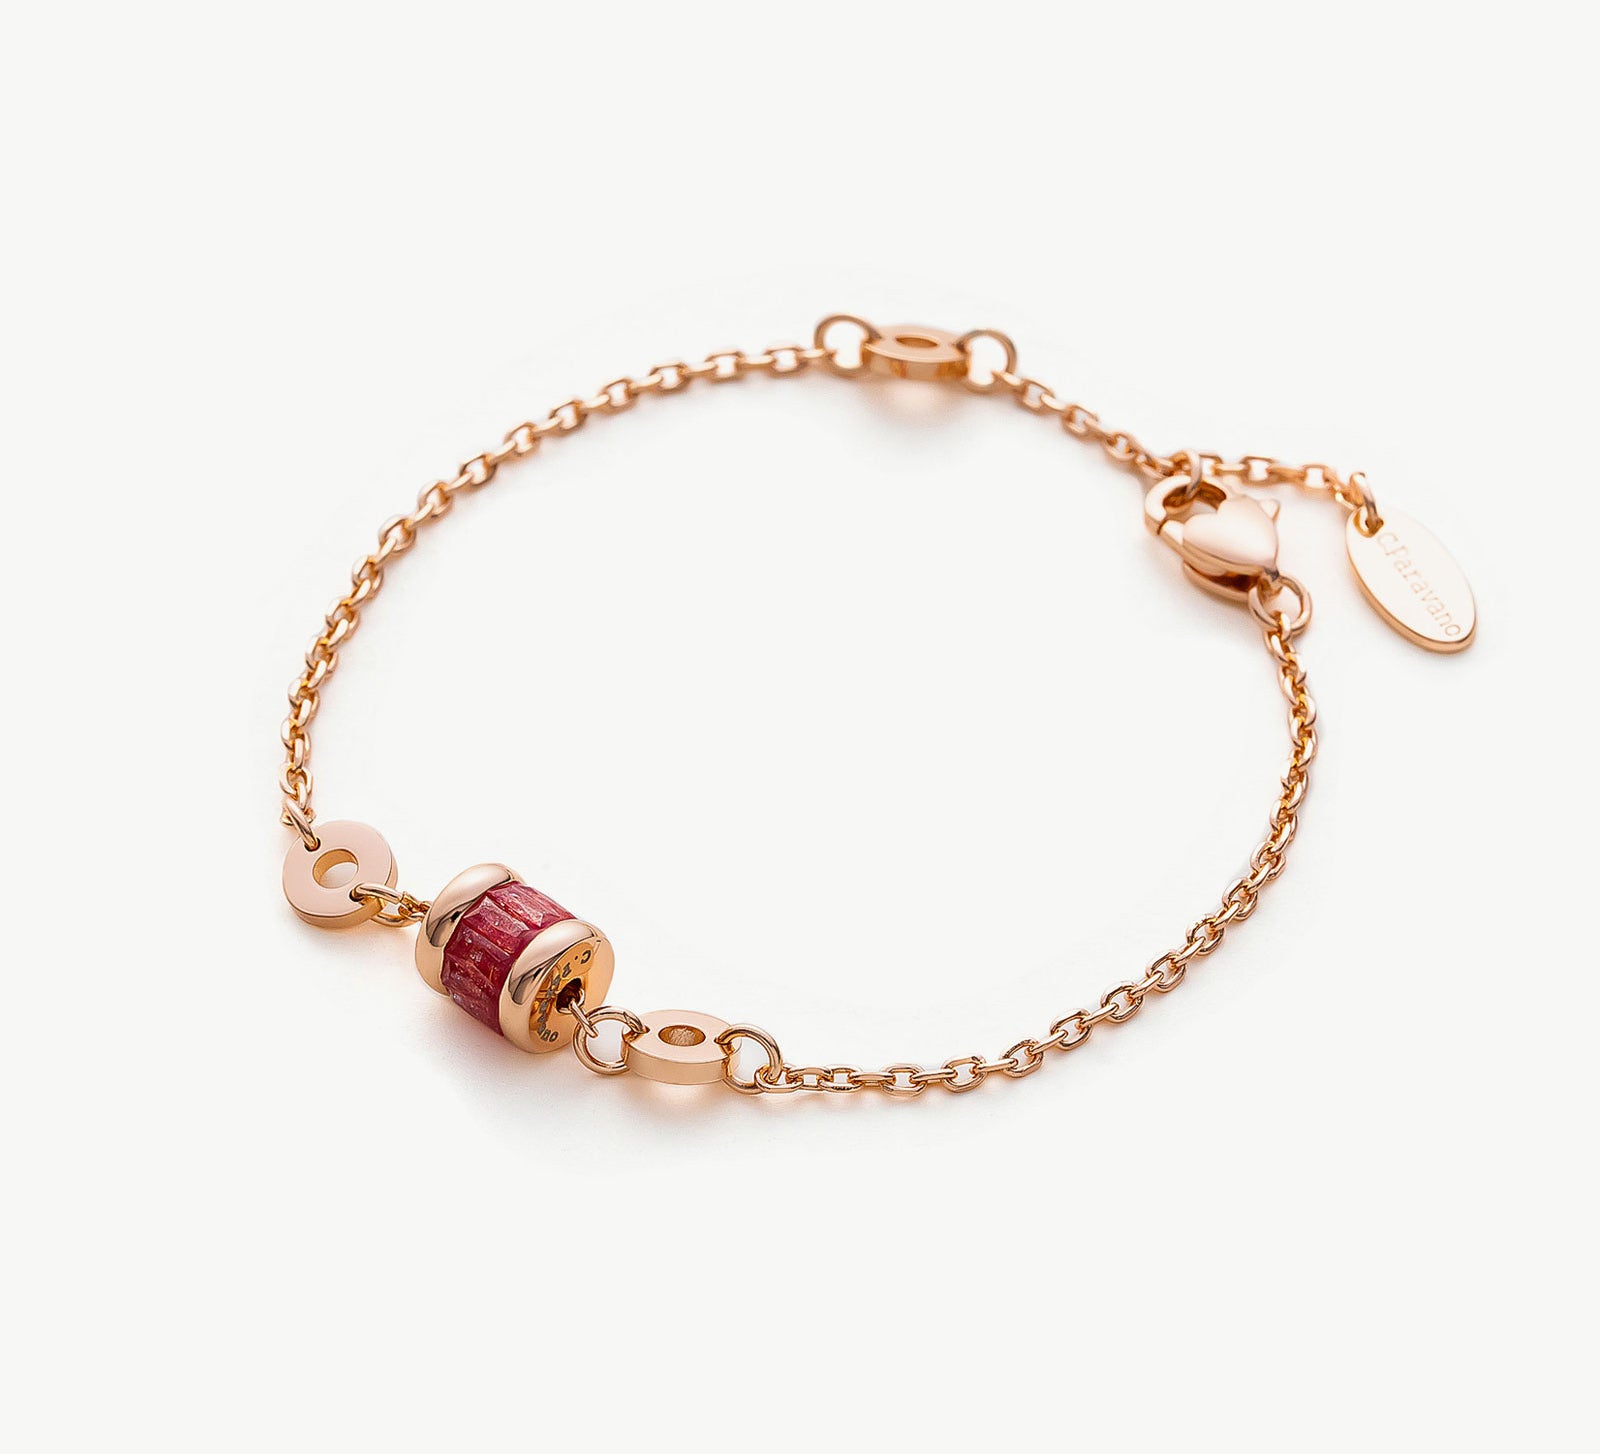 Vintage Agate Bracelet in Rose Gold and Red, exuding romantic radiance with the warm tones of rose gold and the vibrant elegance of red agate gemstones, this bracelet is a perfect expression of love and sophistication